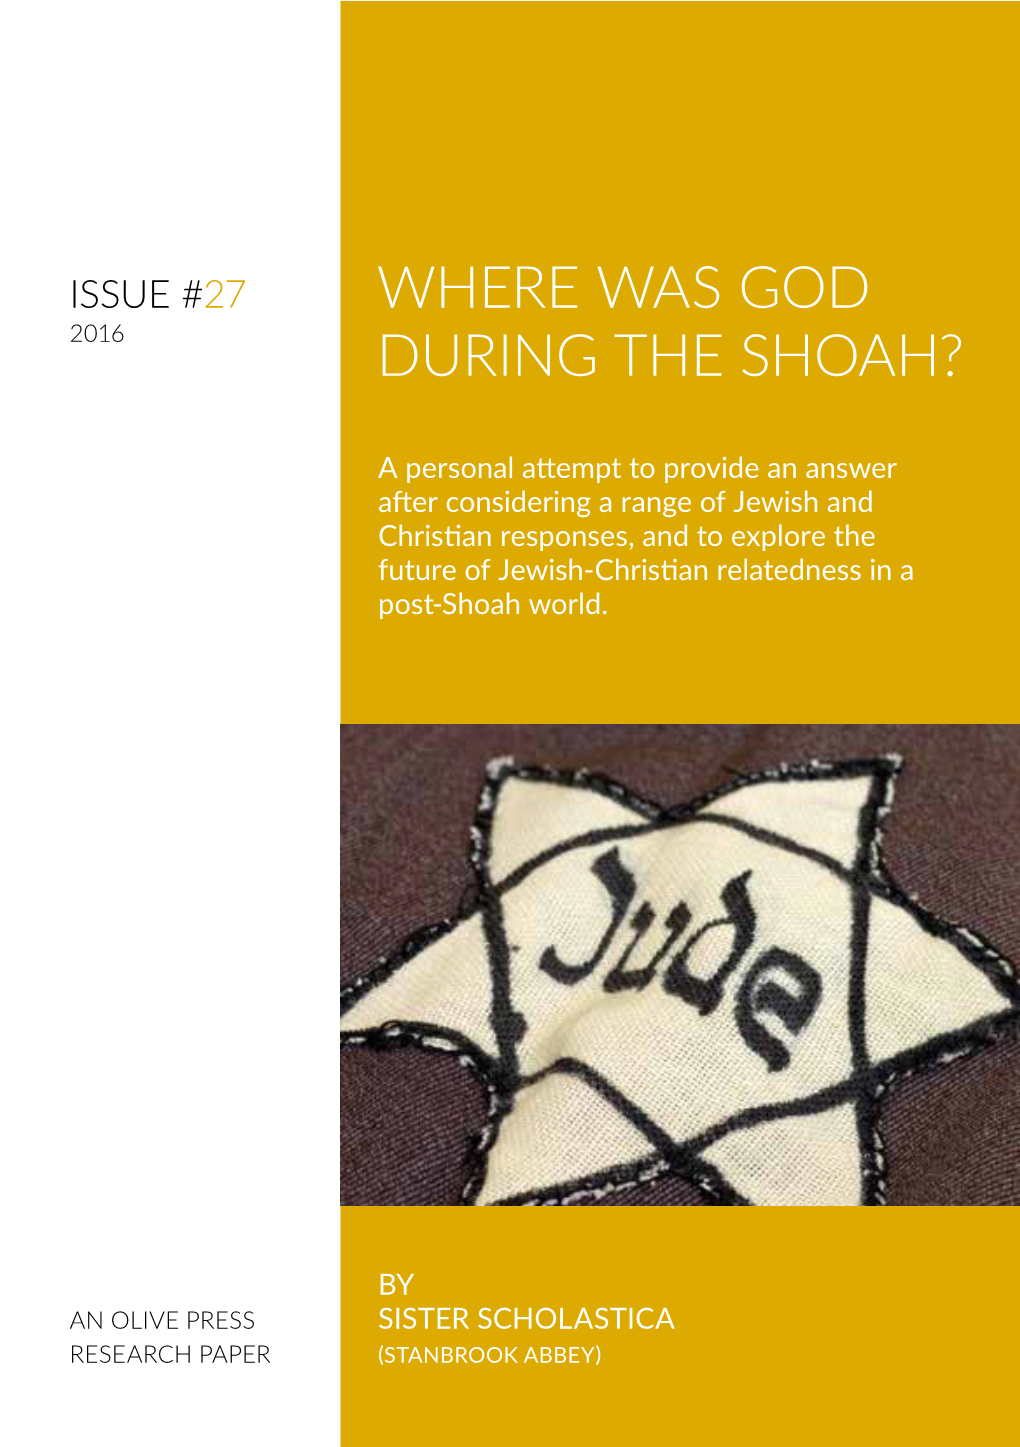 Where Was God During the Shoah?